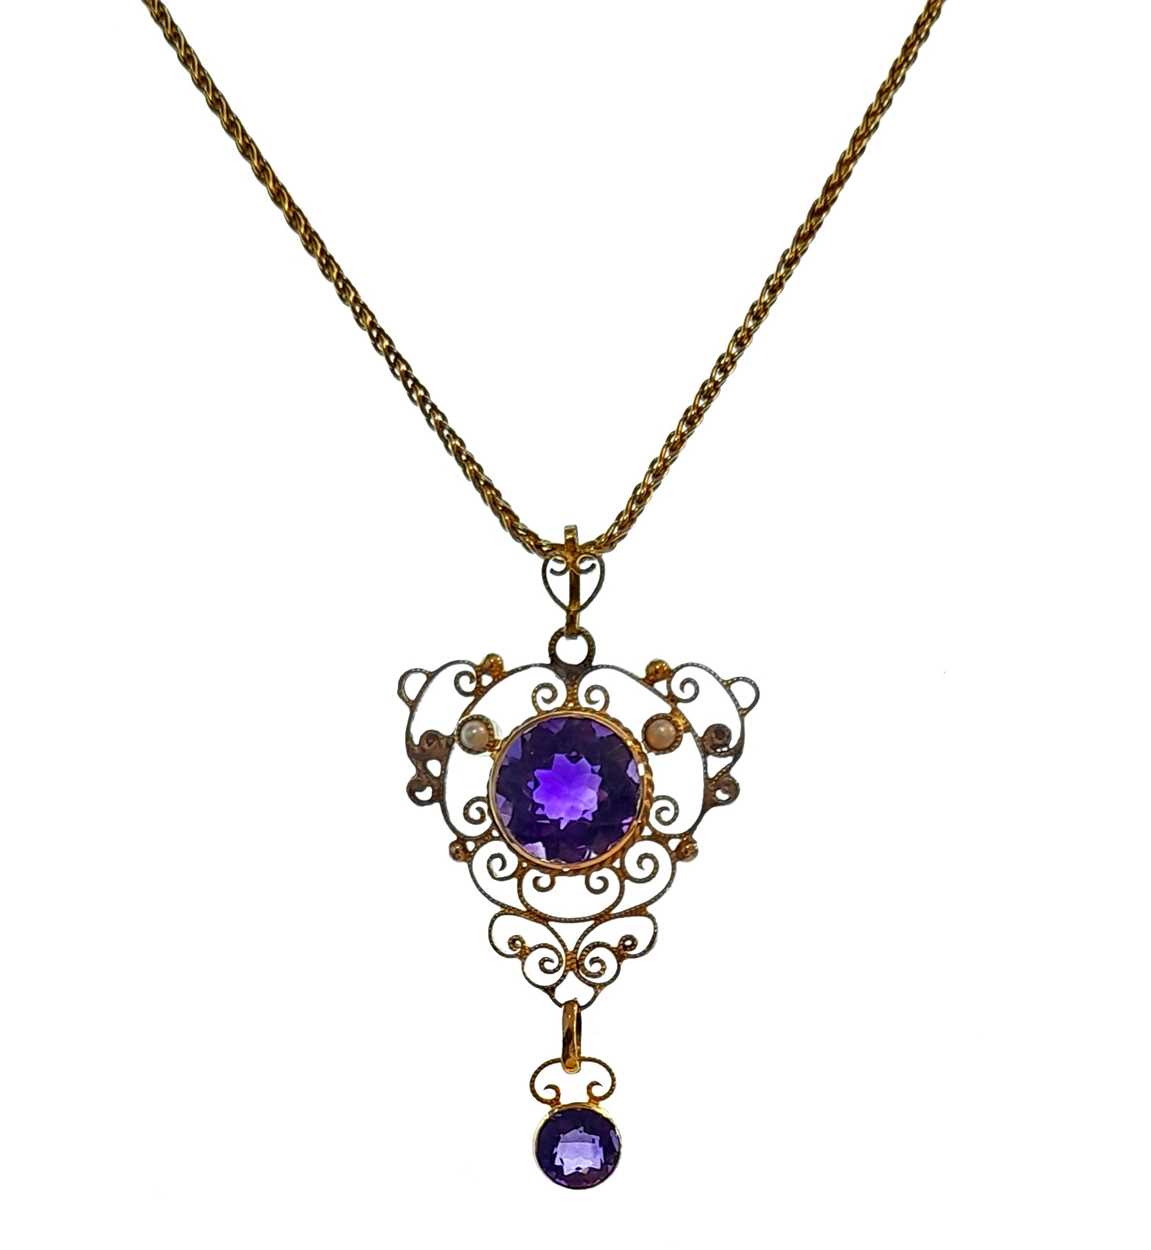 An amethyst pendant and chain, - Image 2 of 4